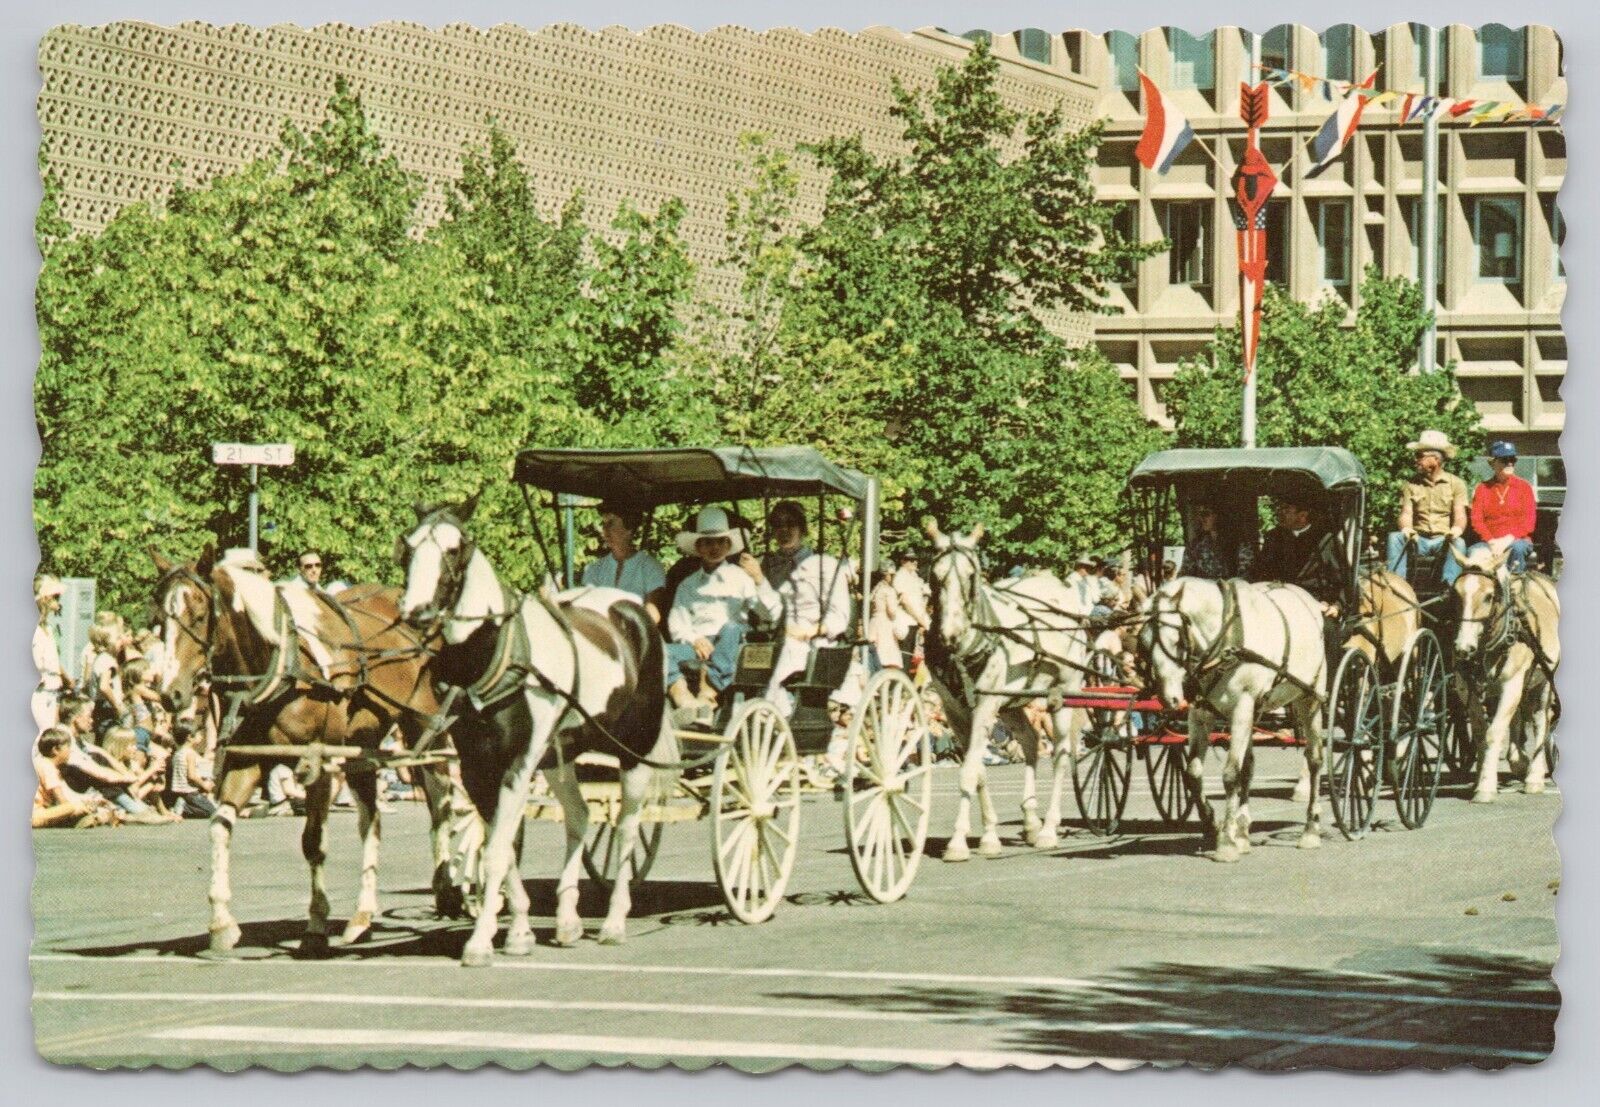 Cheyenne Wyoming, Frontier Days Parade, Horse Drawn Carriages, Vintage Postcard